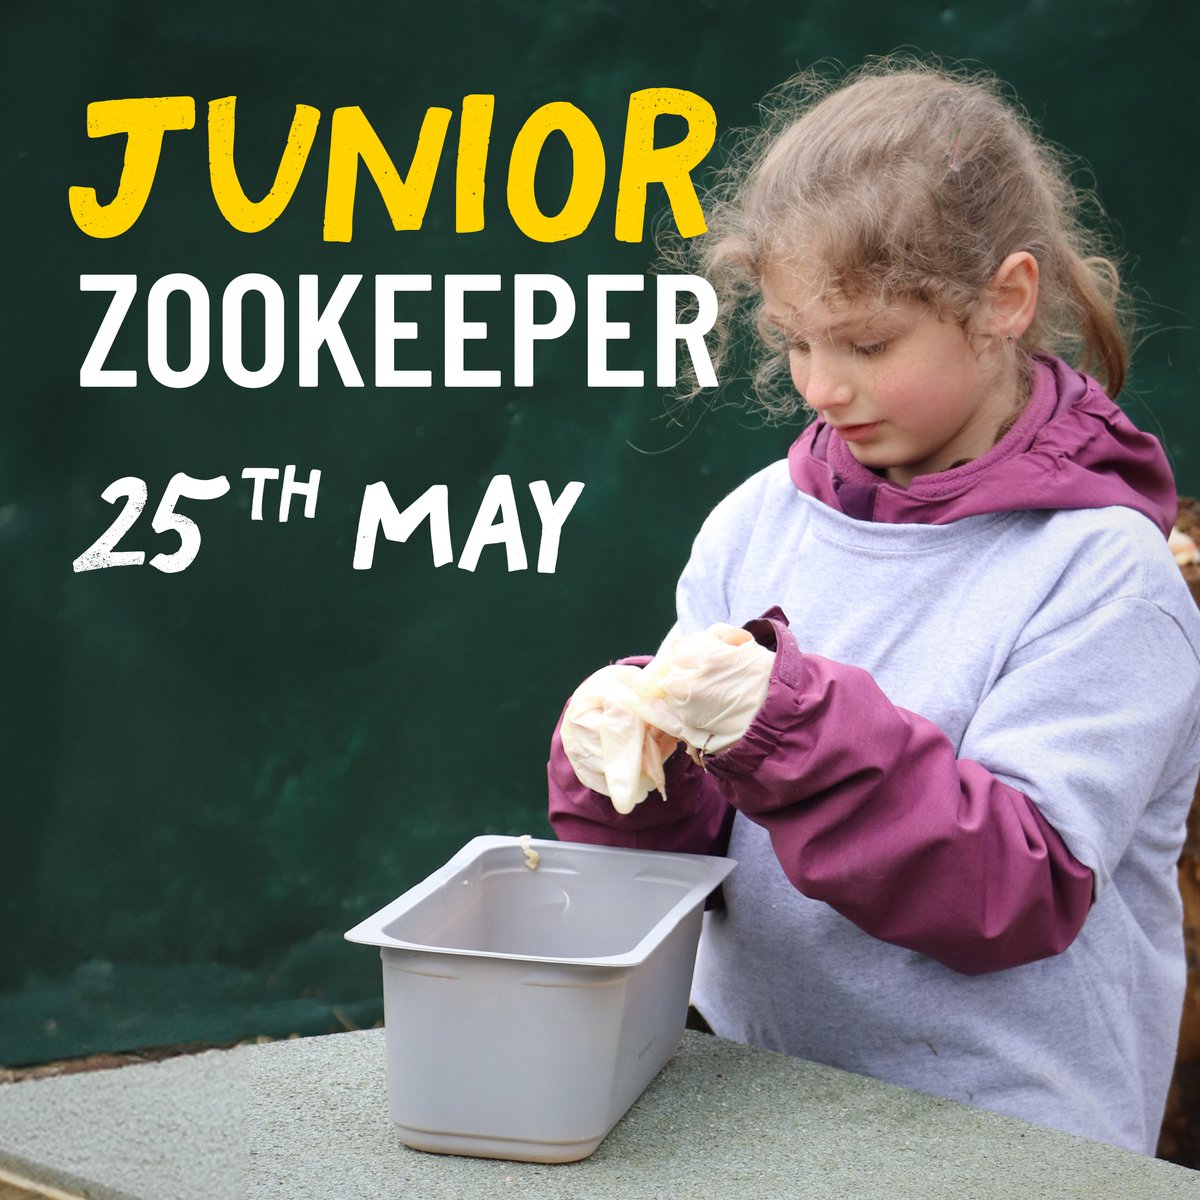 Dive into a world of adventure this May half term at Wildwood Devon and celebrate a week-long Bear Bonanza! Visit our website to find out more and to book in some exciting activities 🤗 devon.wildwoodtrust.org/events-experie… From Sat 25th May to Sun 2nd June #wildwooddevon